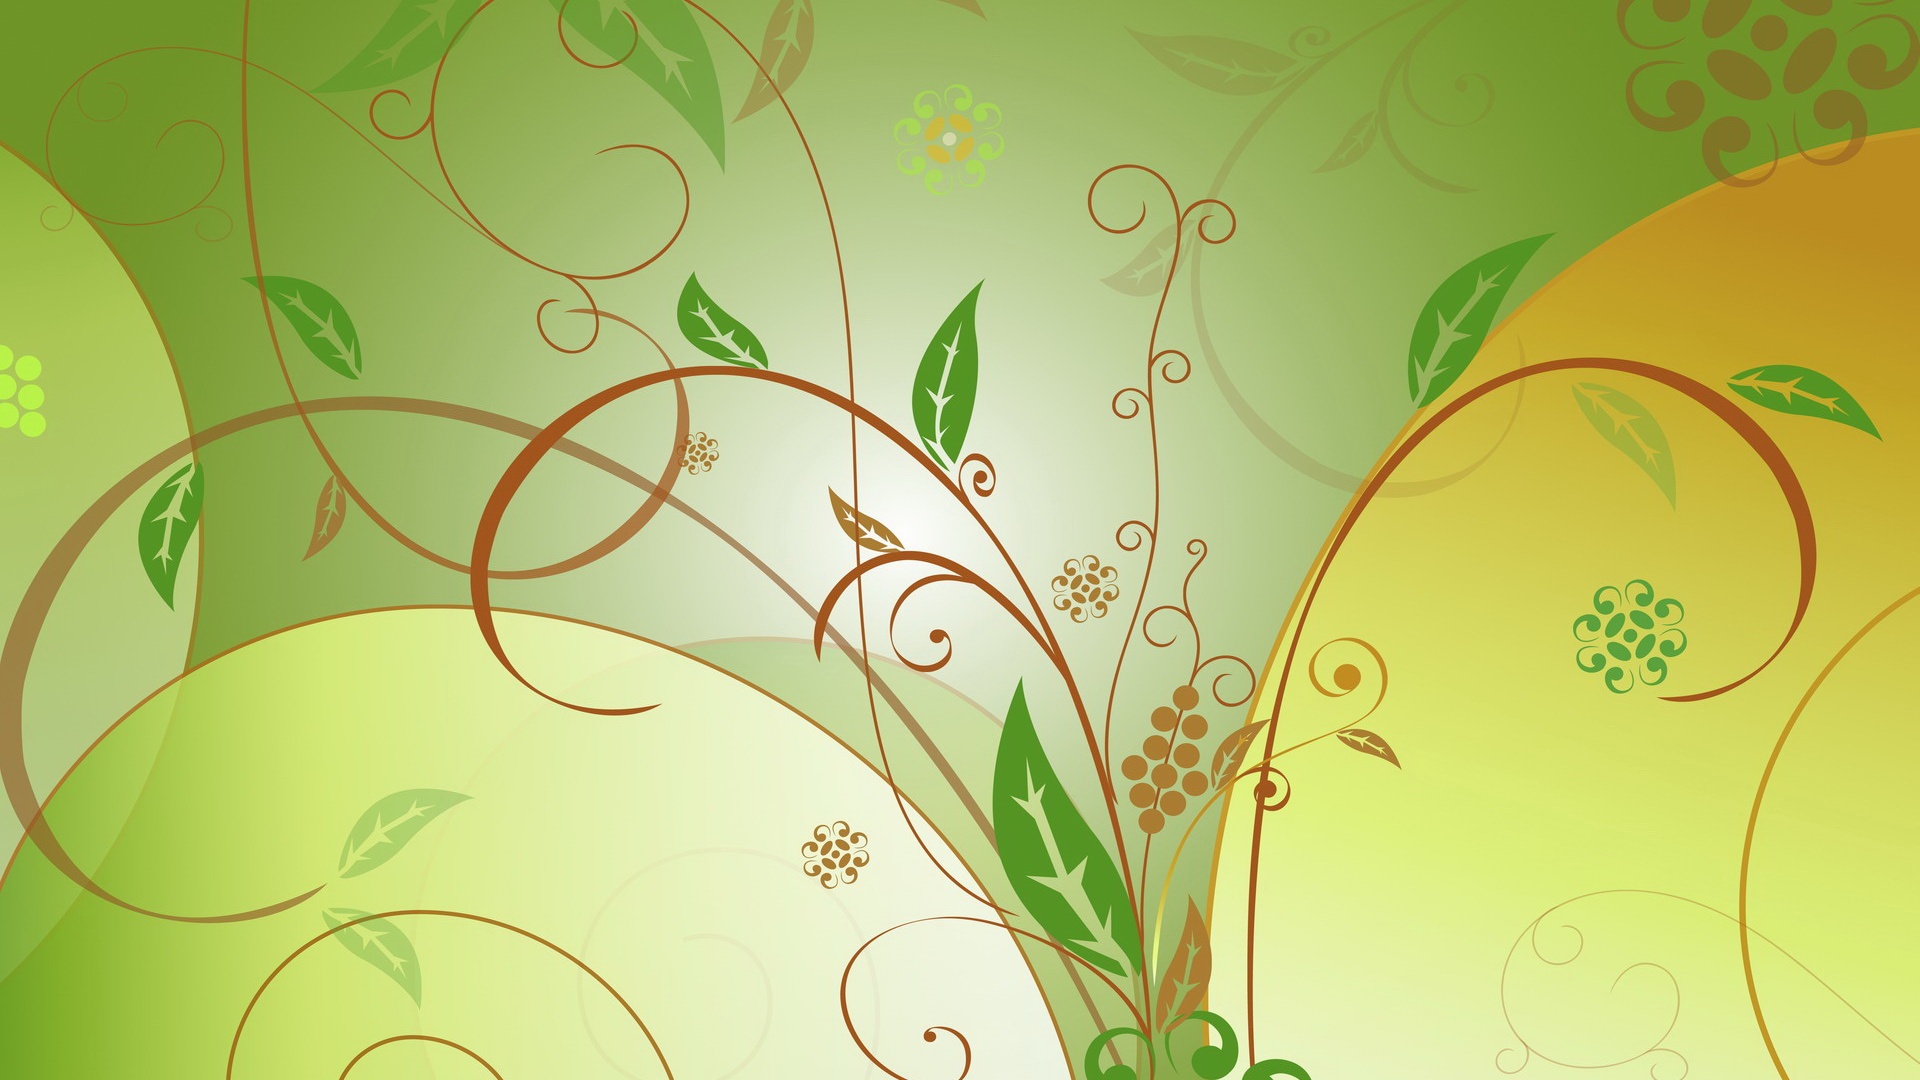 Abstract Spring Wallpapers